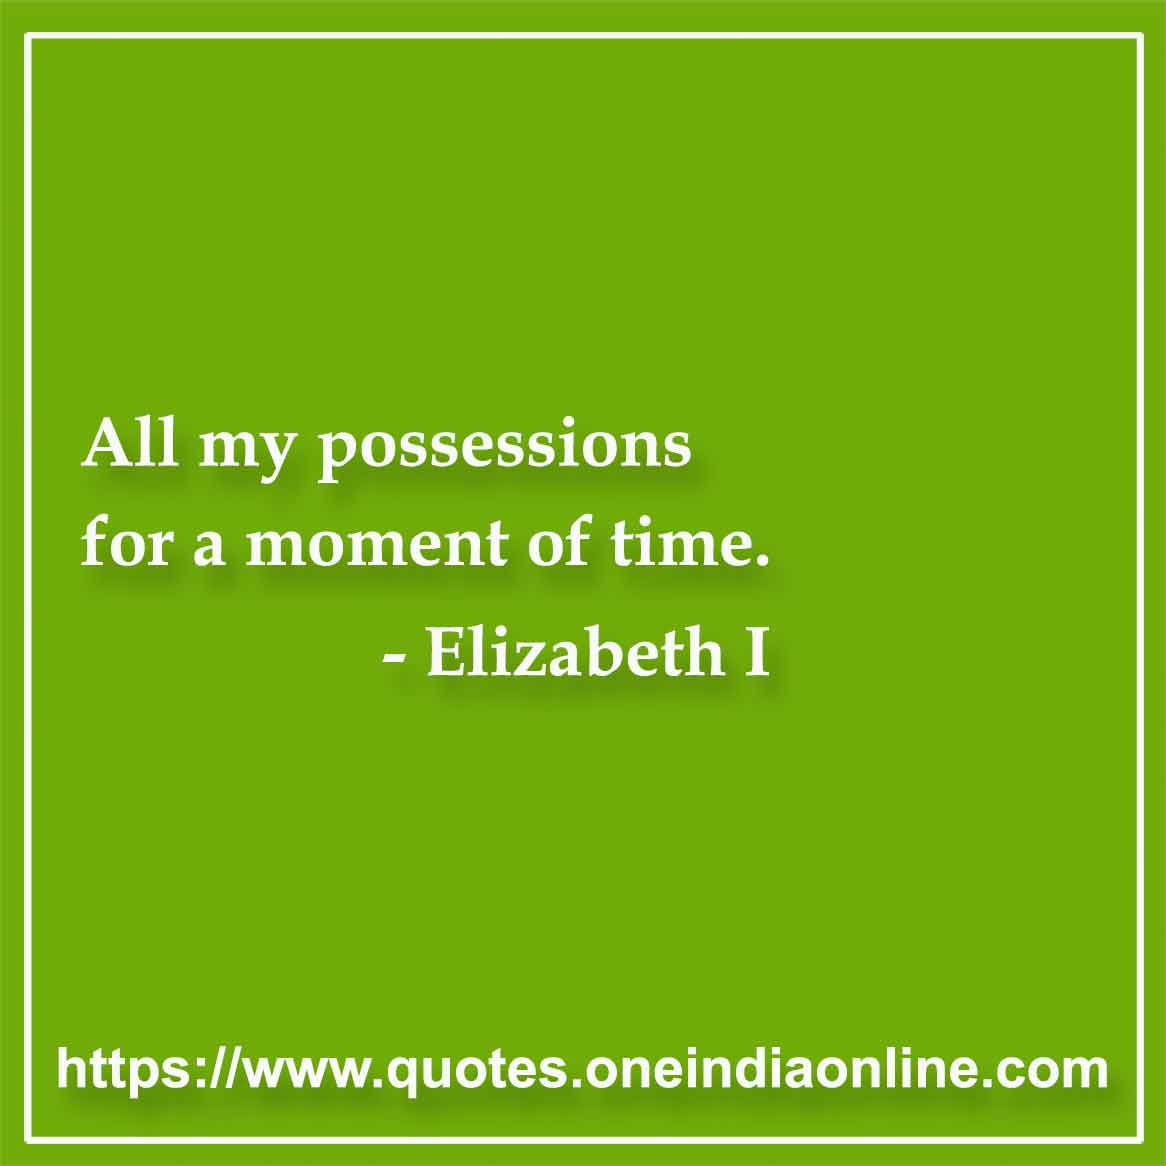 All my possessions for a moment of time.

- Time Quotes by Elizabeth I